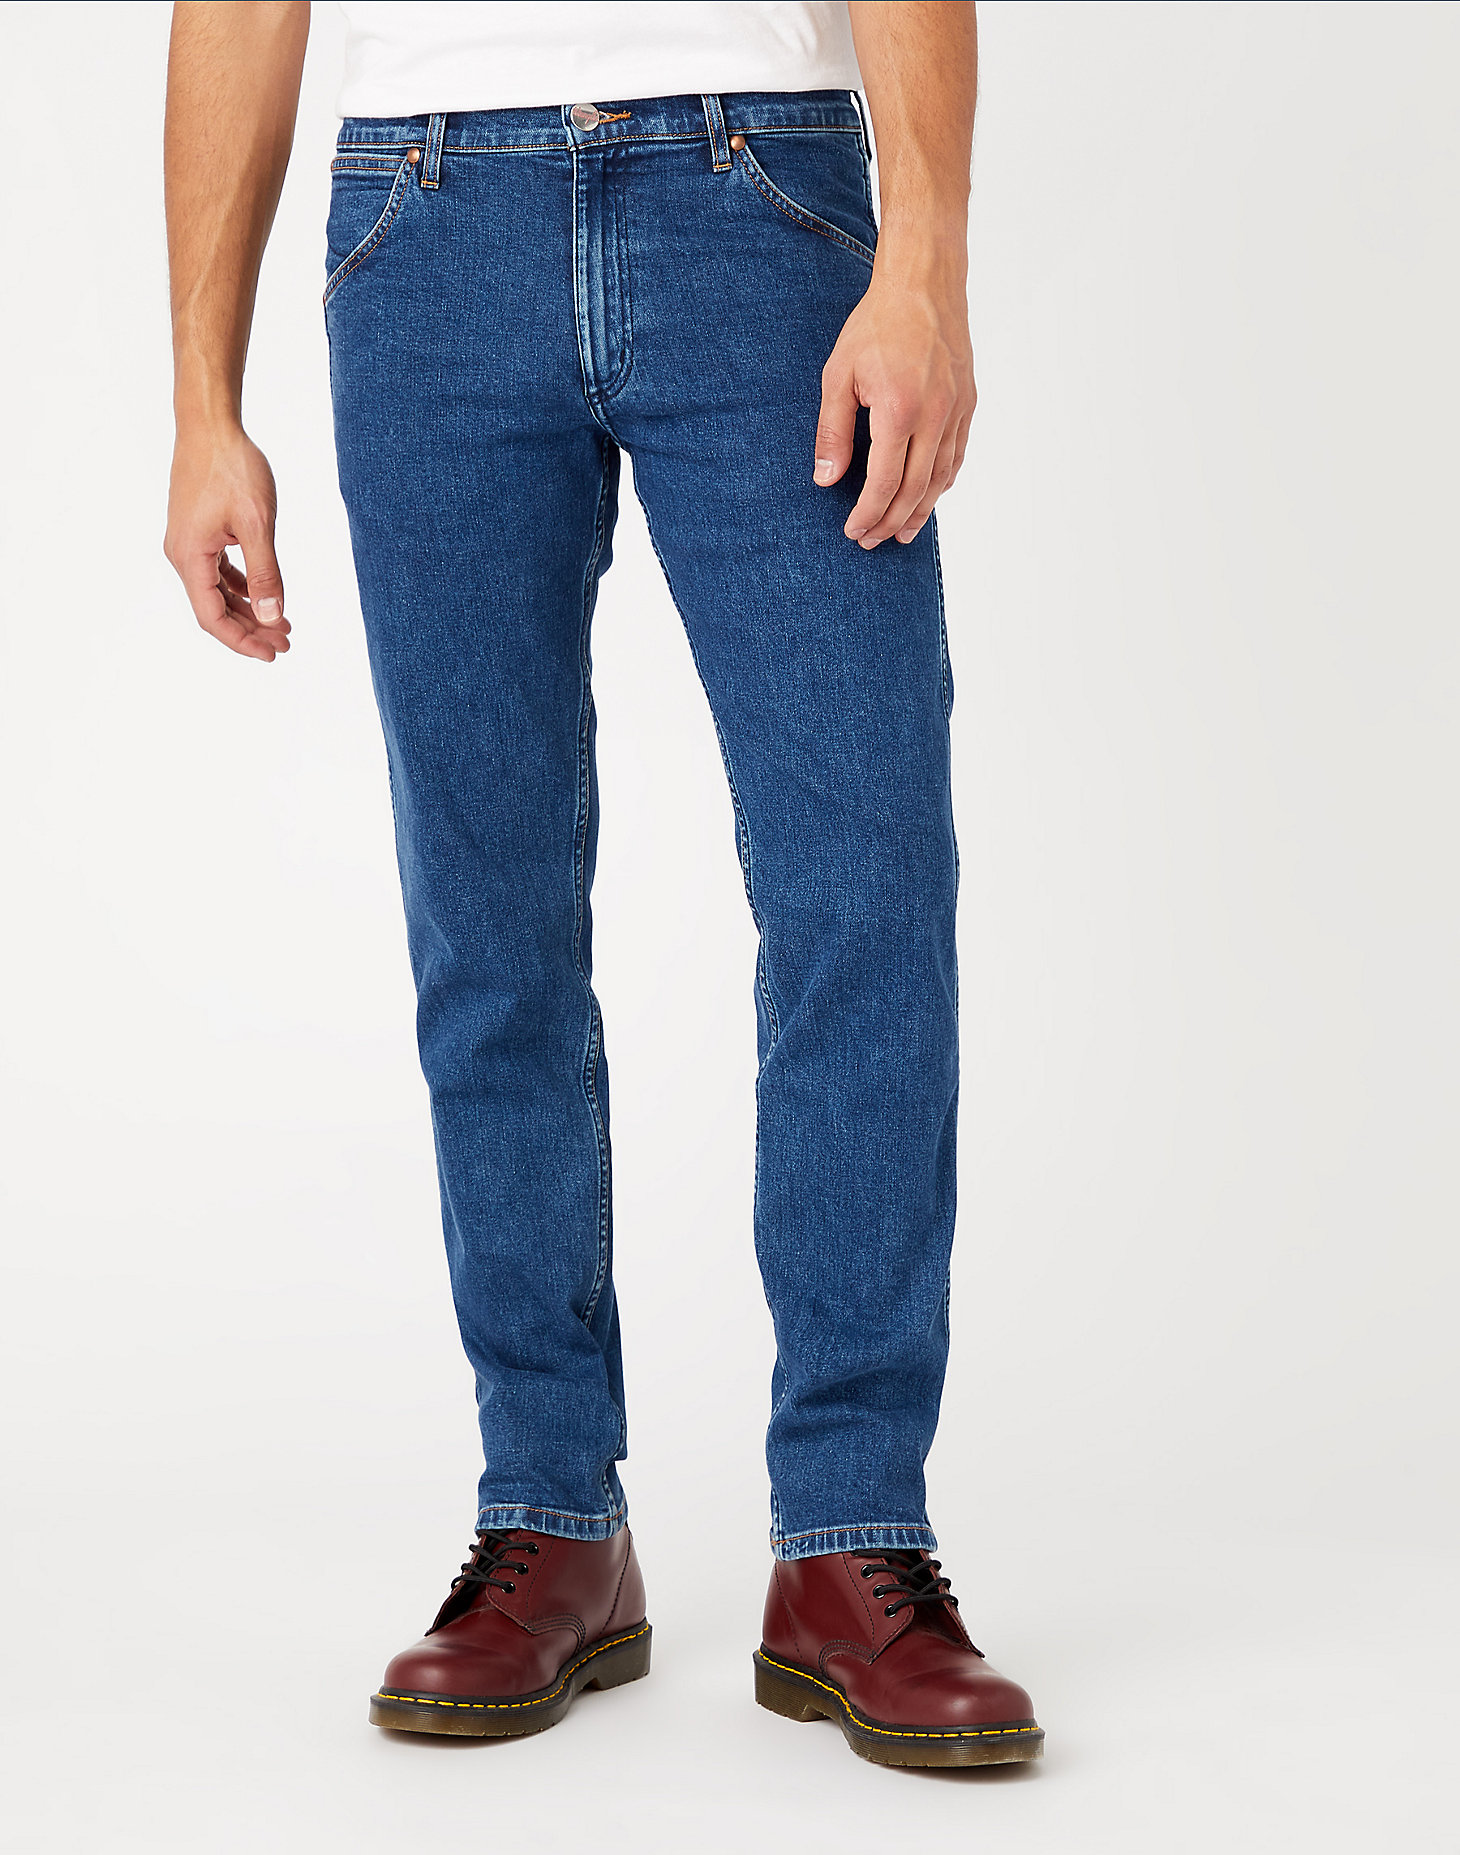 Icons 11MWZ Western Slim Jeans in 6 Months main view